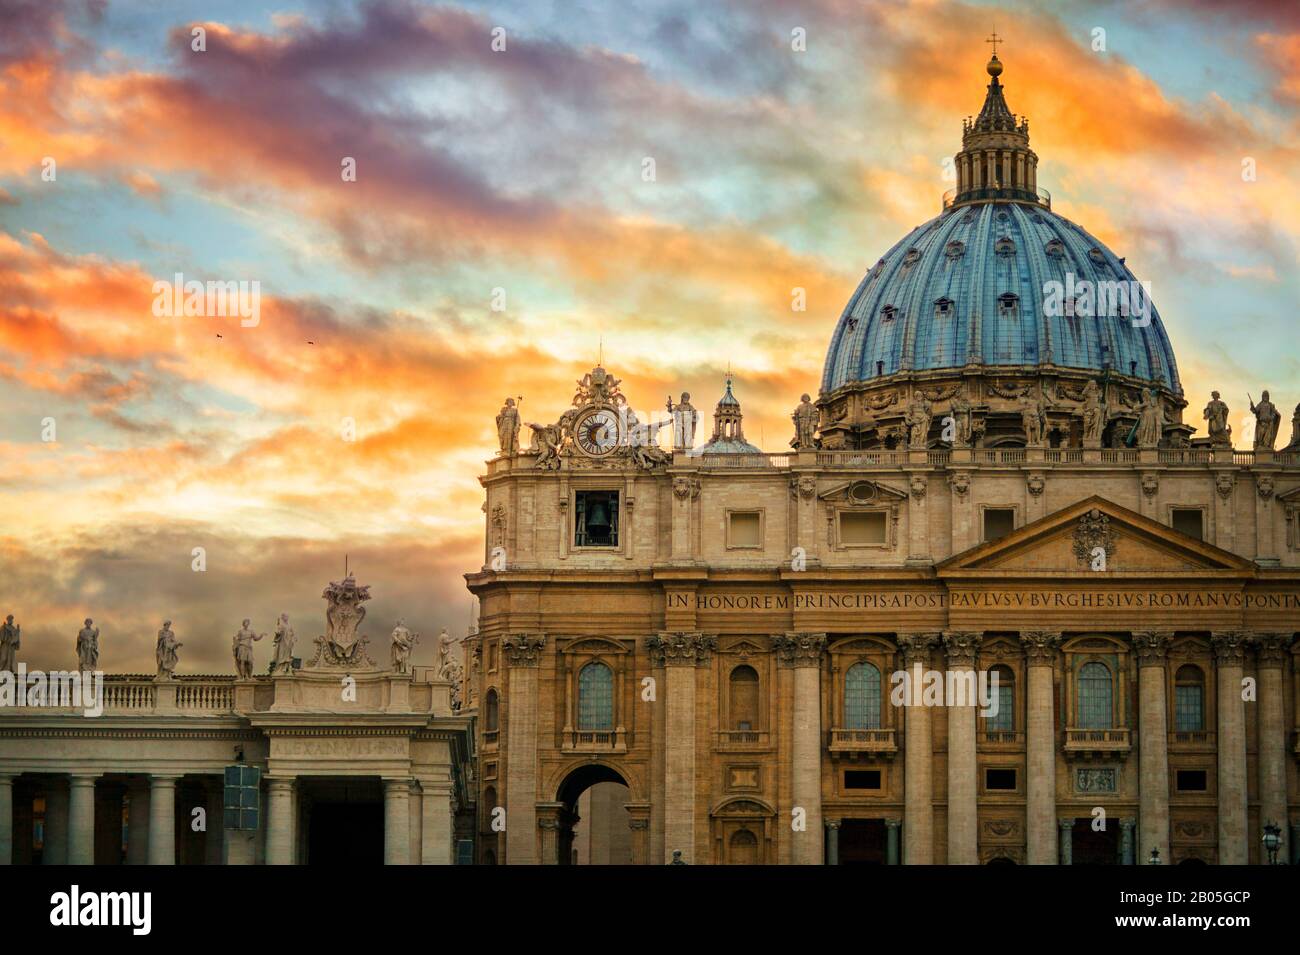 Sunset over the Sistine Chapel, Vatican City, Rome, Italy. Stock Photo